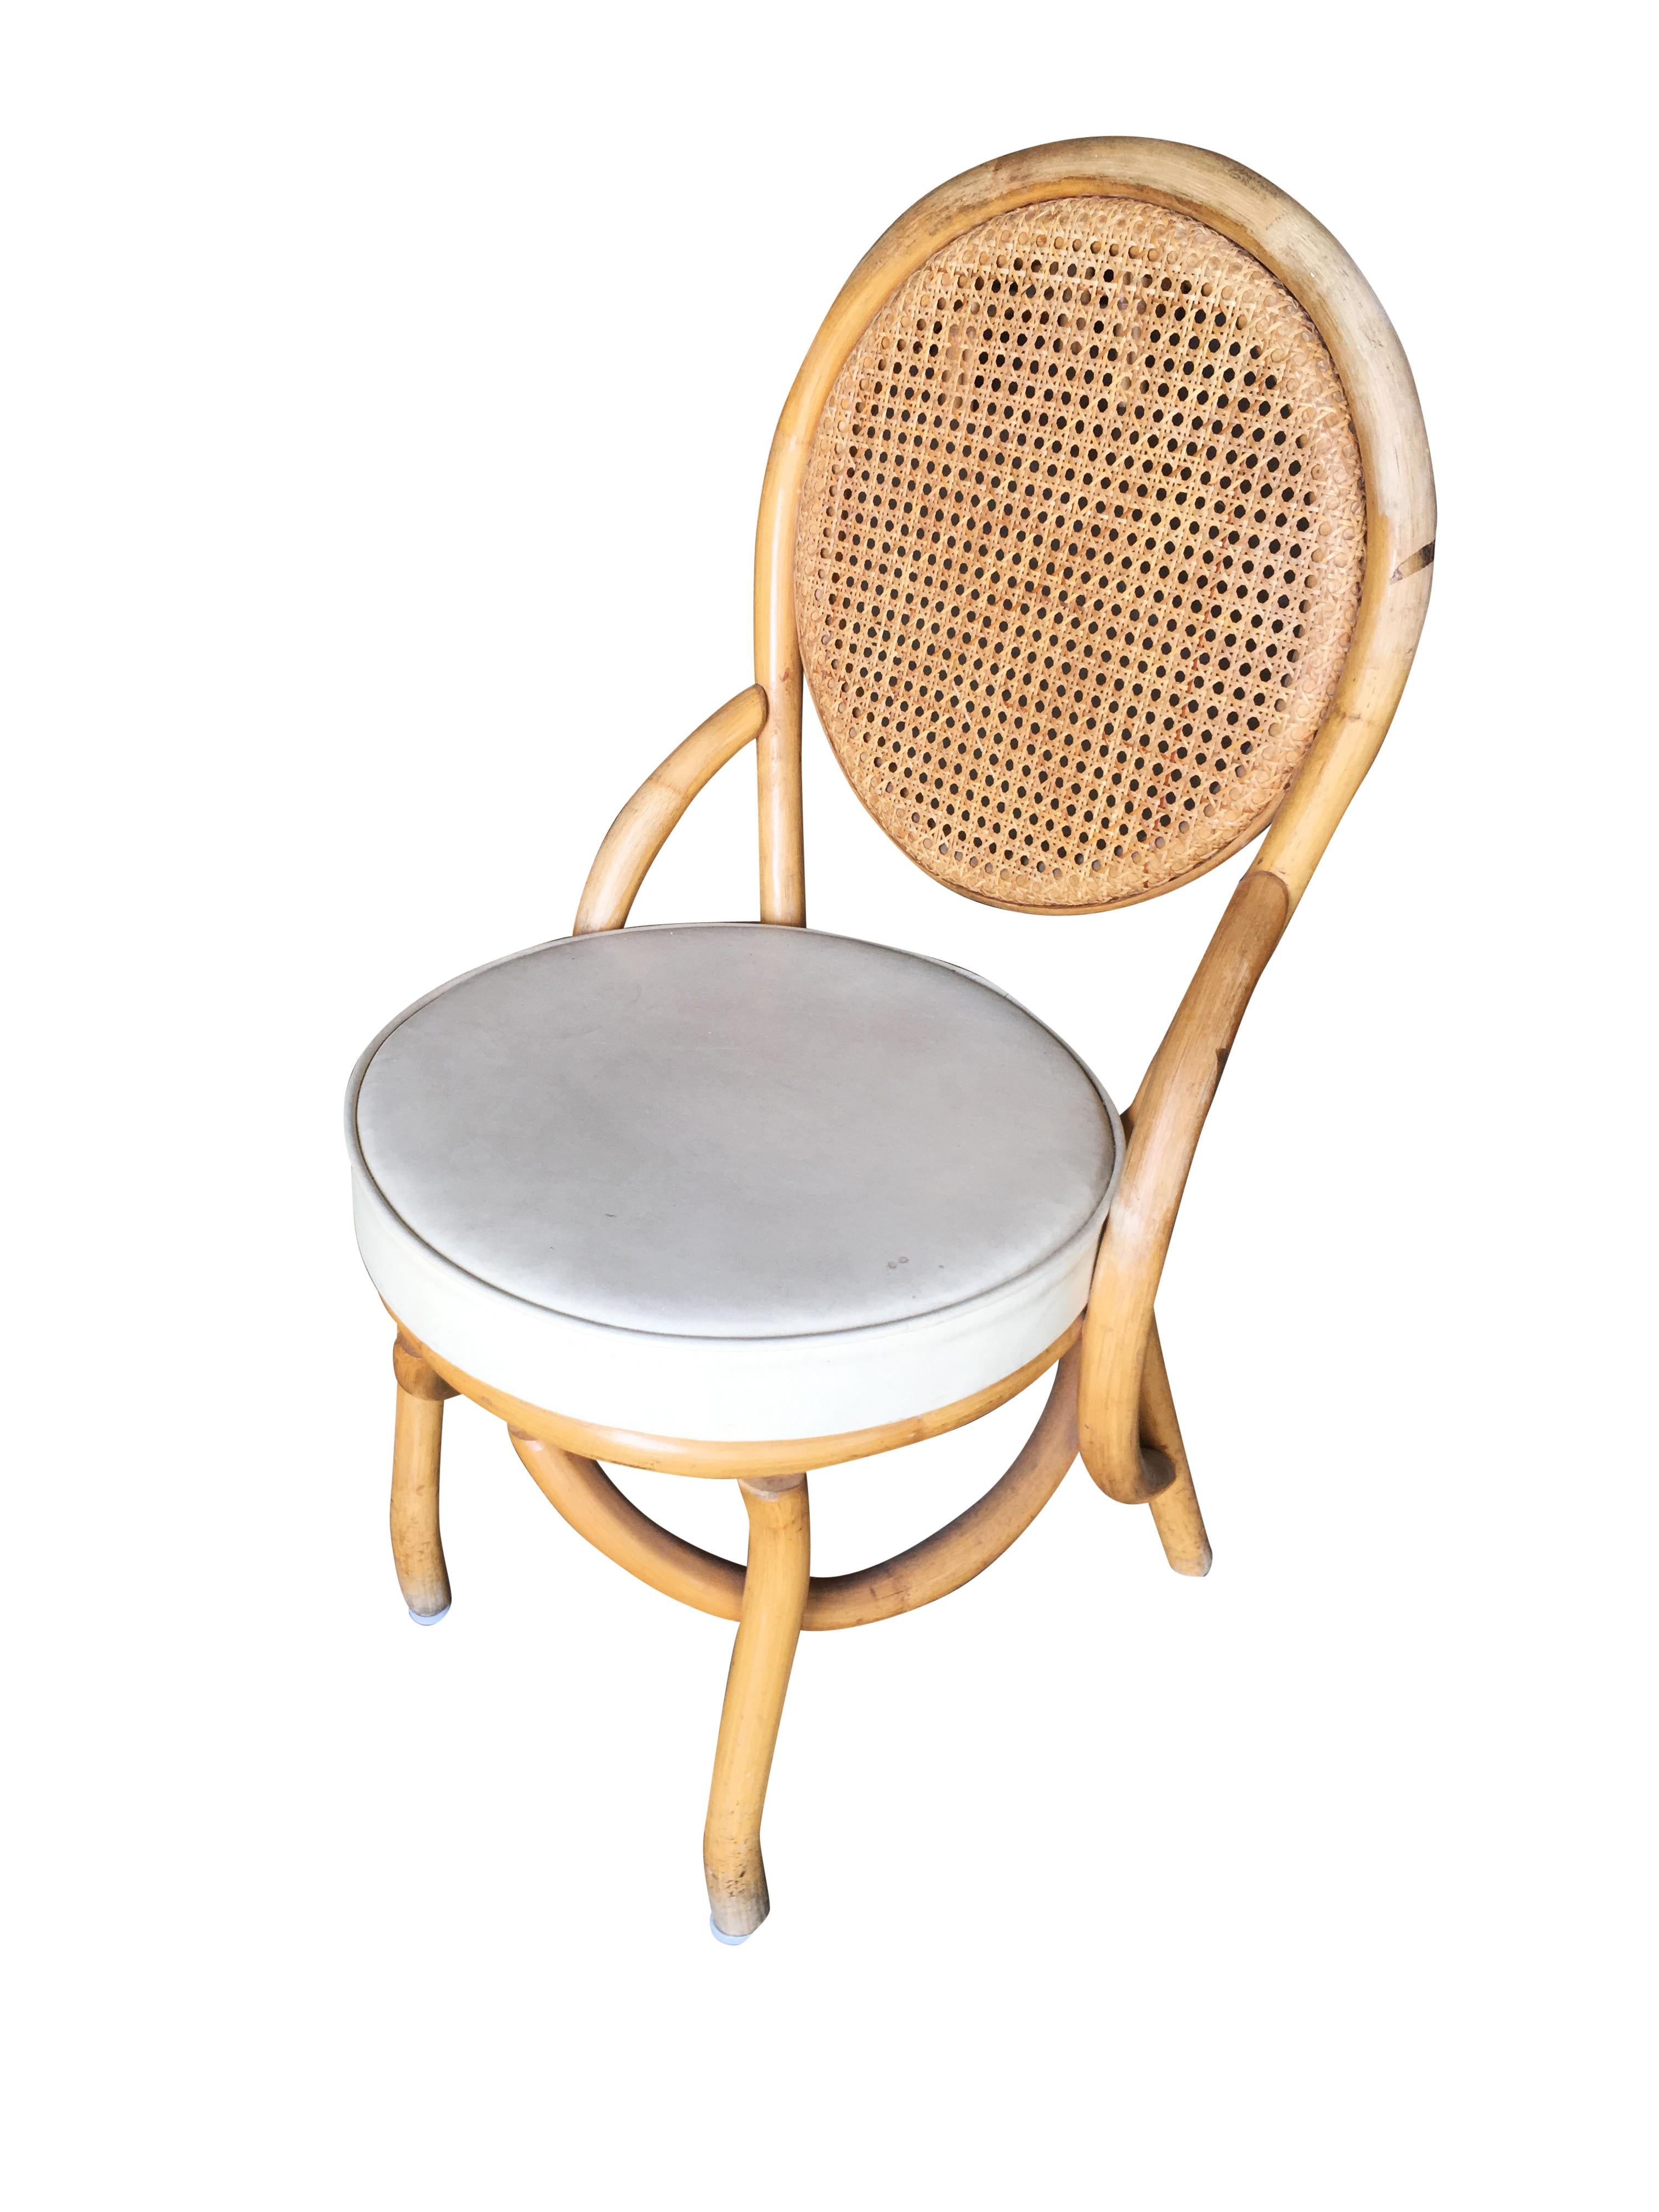 Set of five Post-war 1950s rattan dining side chair with woven wicker seat back and white vinyl seat. 

Designed in the manner of Paul Frankl.

Custom cushions using C.O.M. (Customers Own Material) are included in the price. Simply supply the fabric